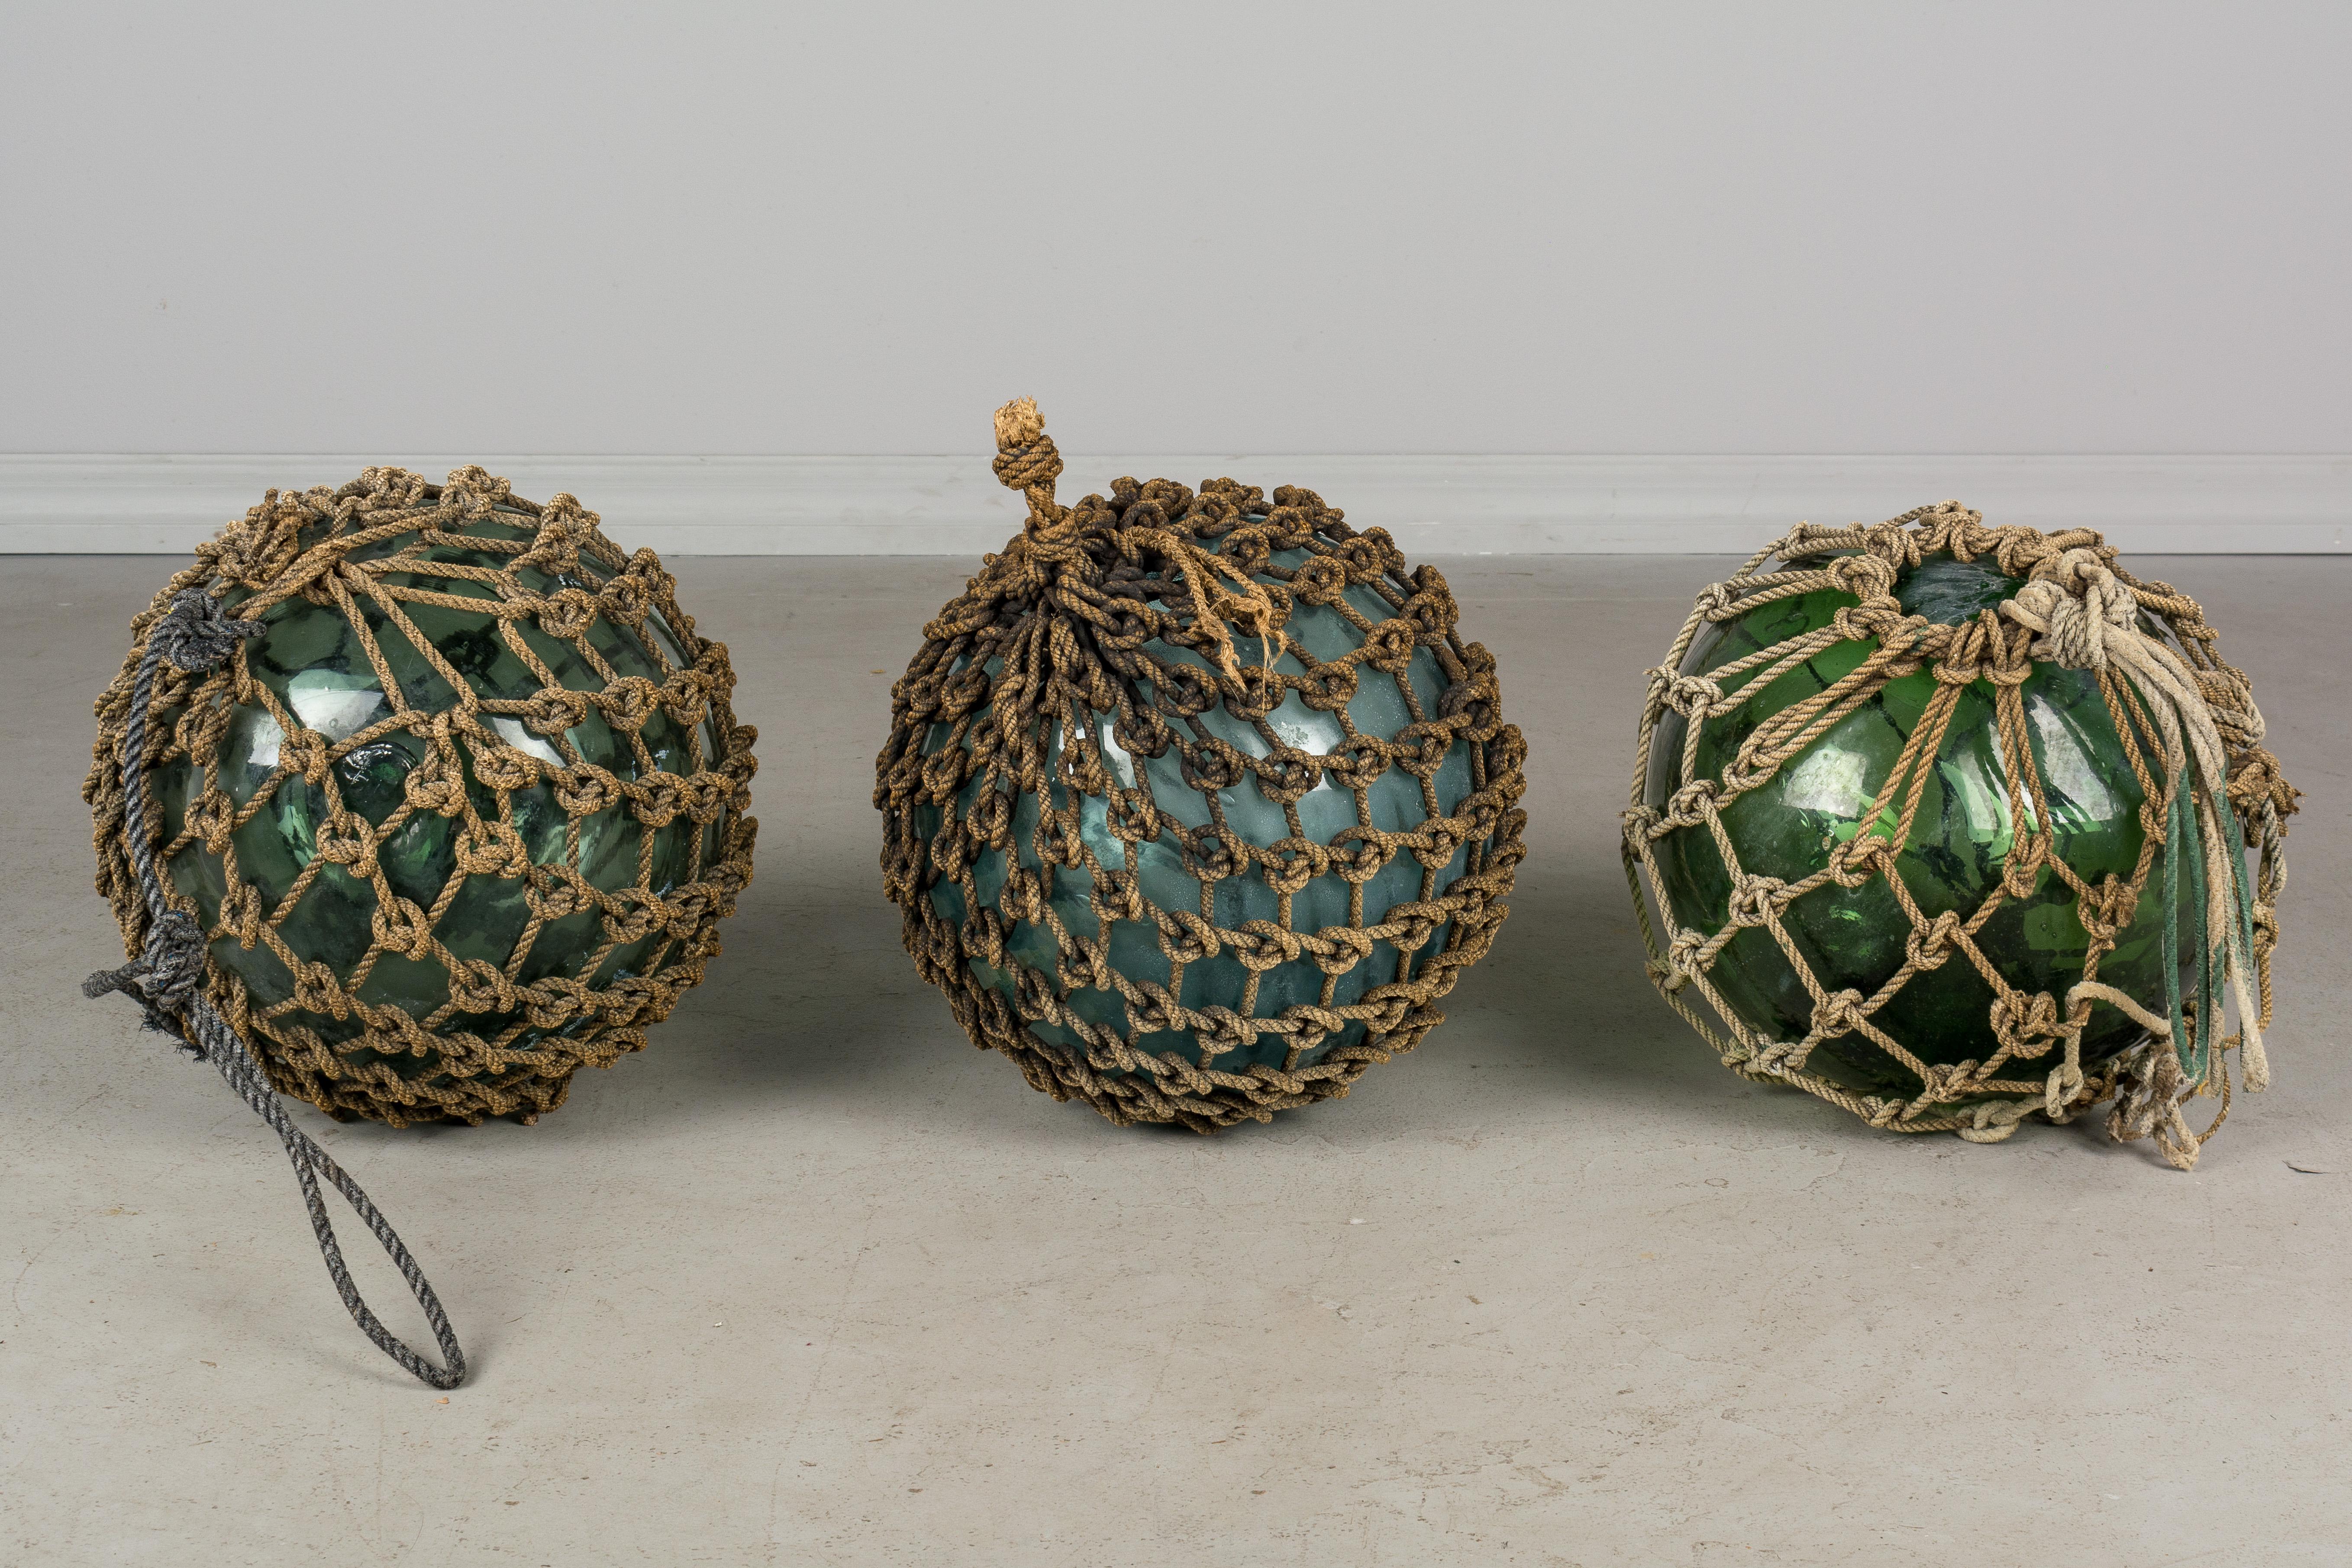 A set of three glasses Japanese fishing floats. These large hand blown globes were made from recycled glass bottles encased in tightly knotted rope and were used to buoy a fisherman's net when cast into the water. The rope varies in condition with